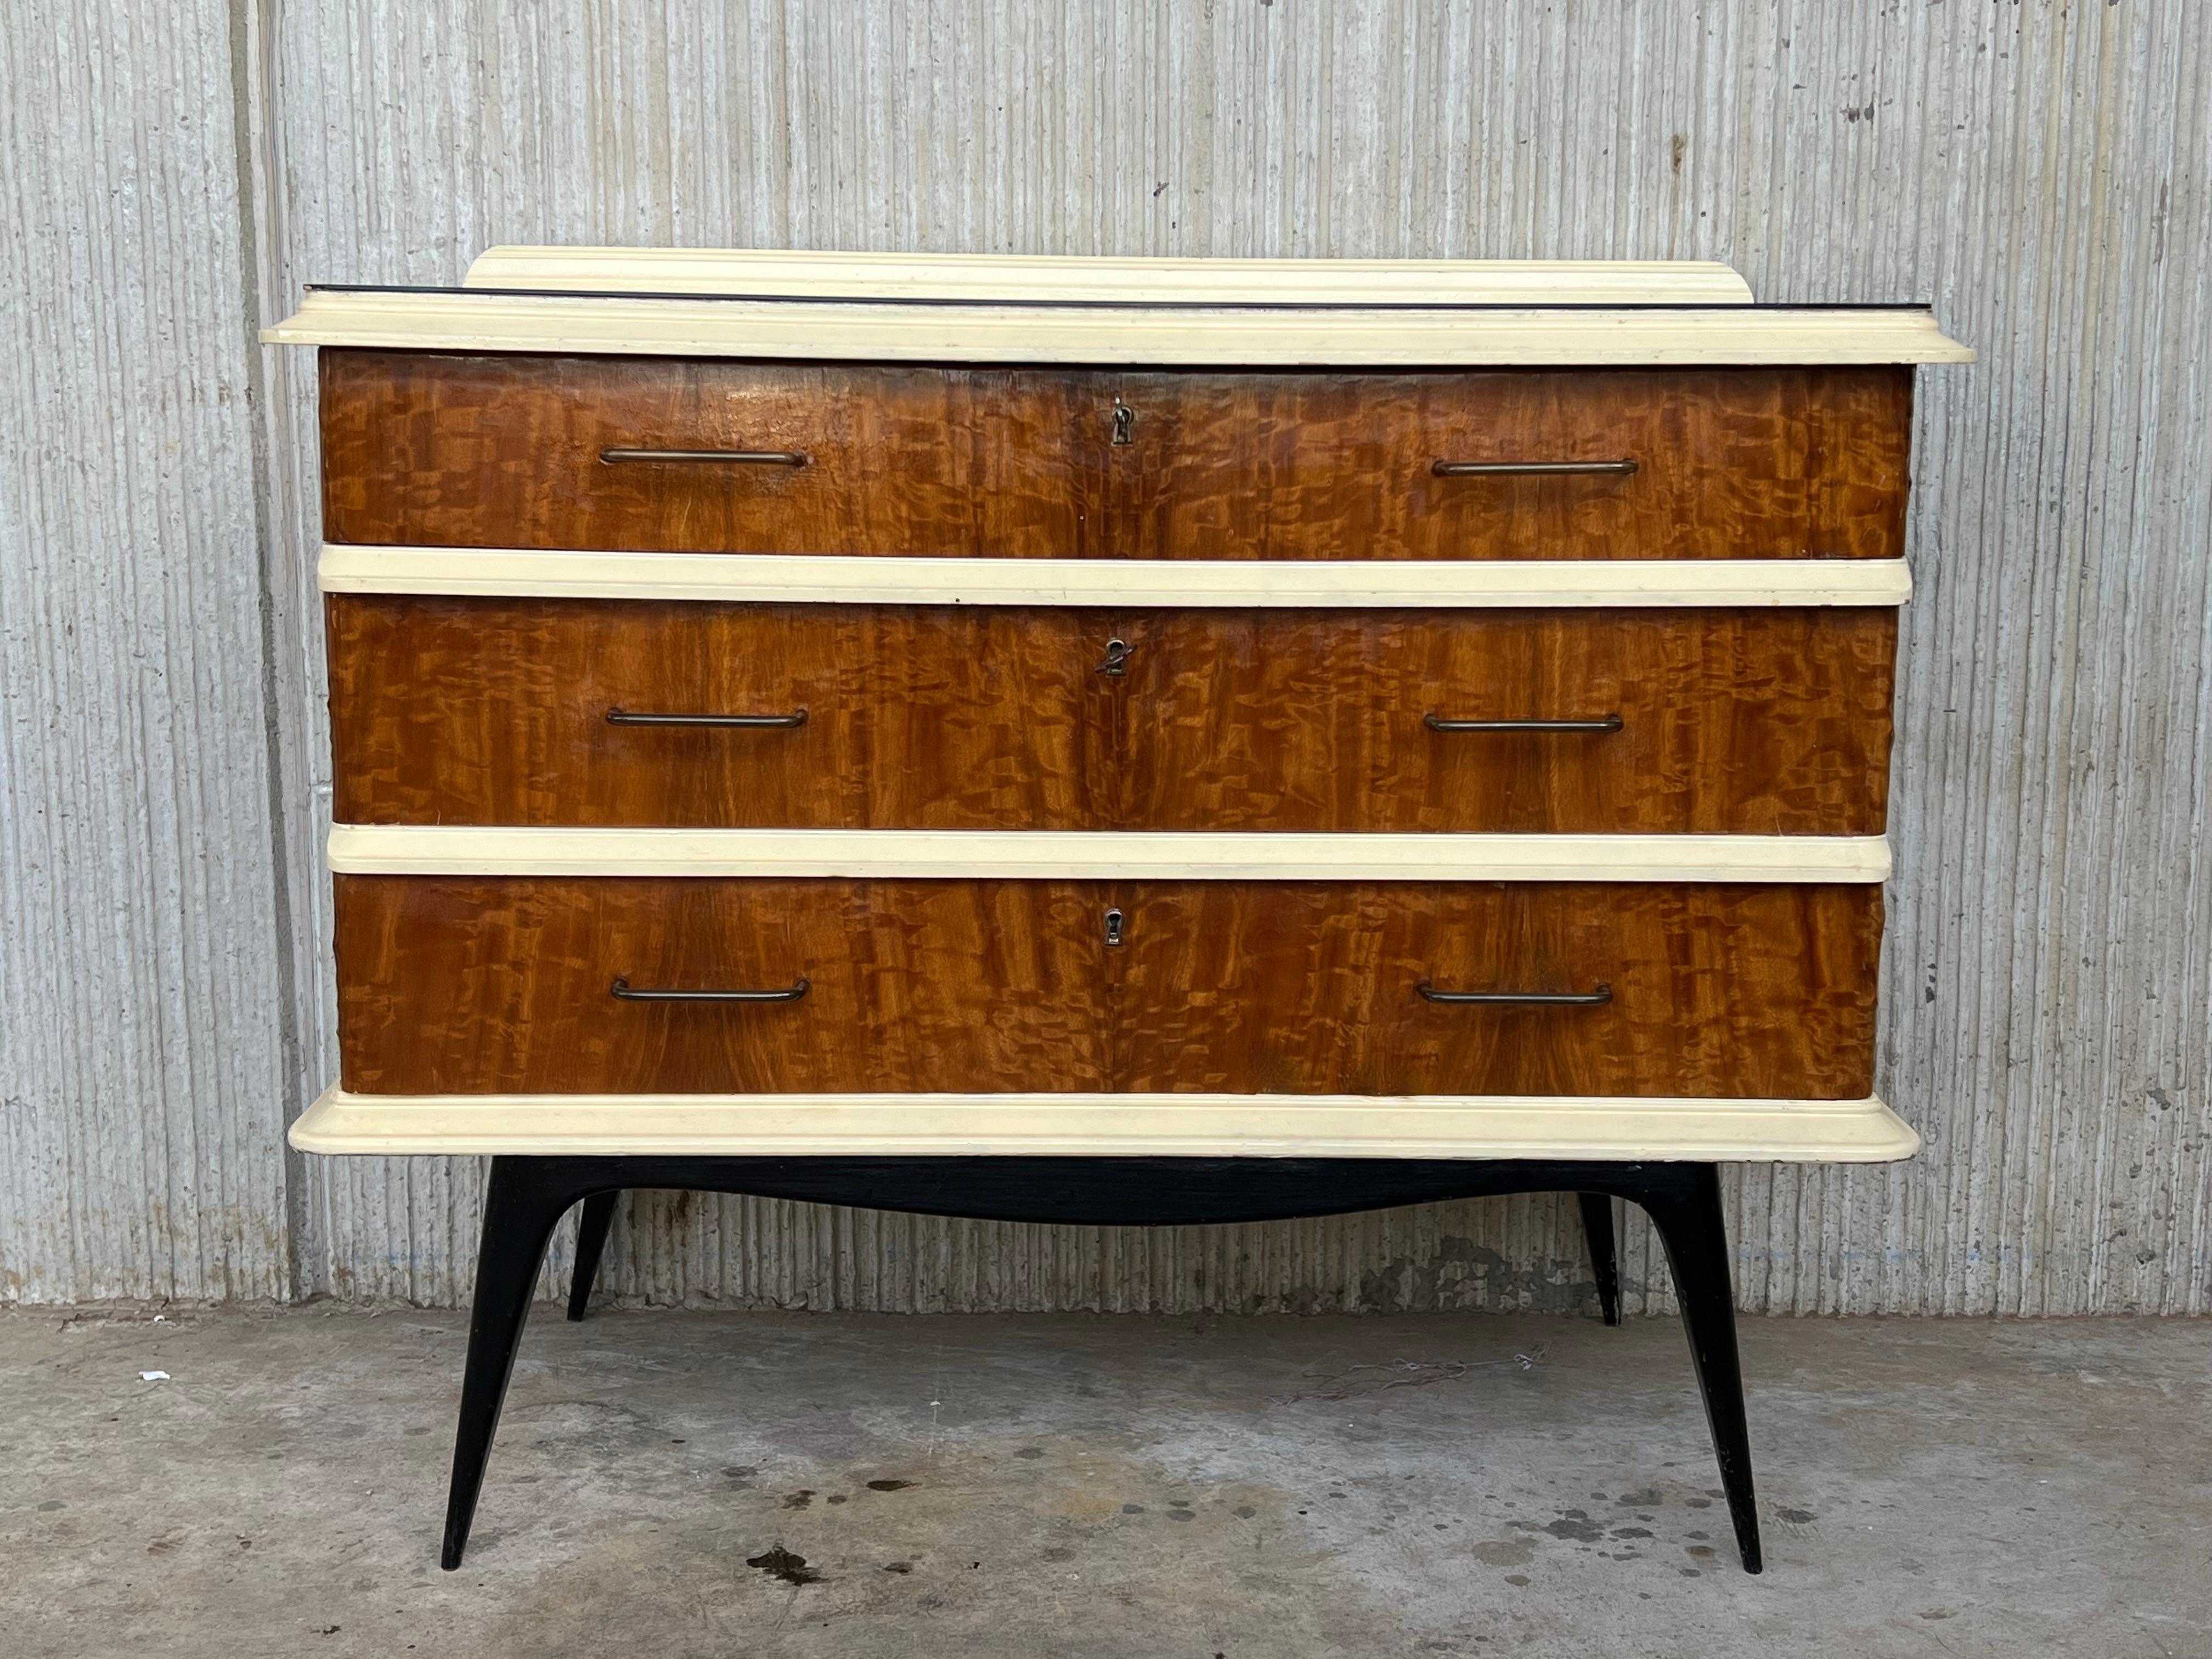 Commode or chest of drawers with three drawers and crest . Are made of wood and veneer and finished with cream lacquered wood in edges and black ebonized legs .
The drawers have a workable lock

We have matching nightstands.